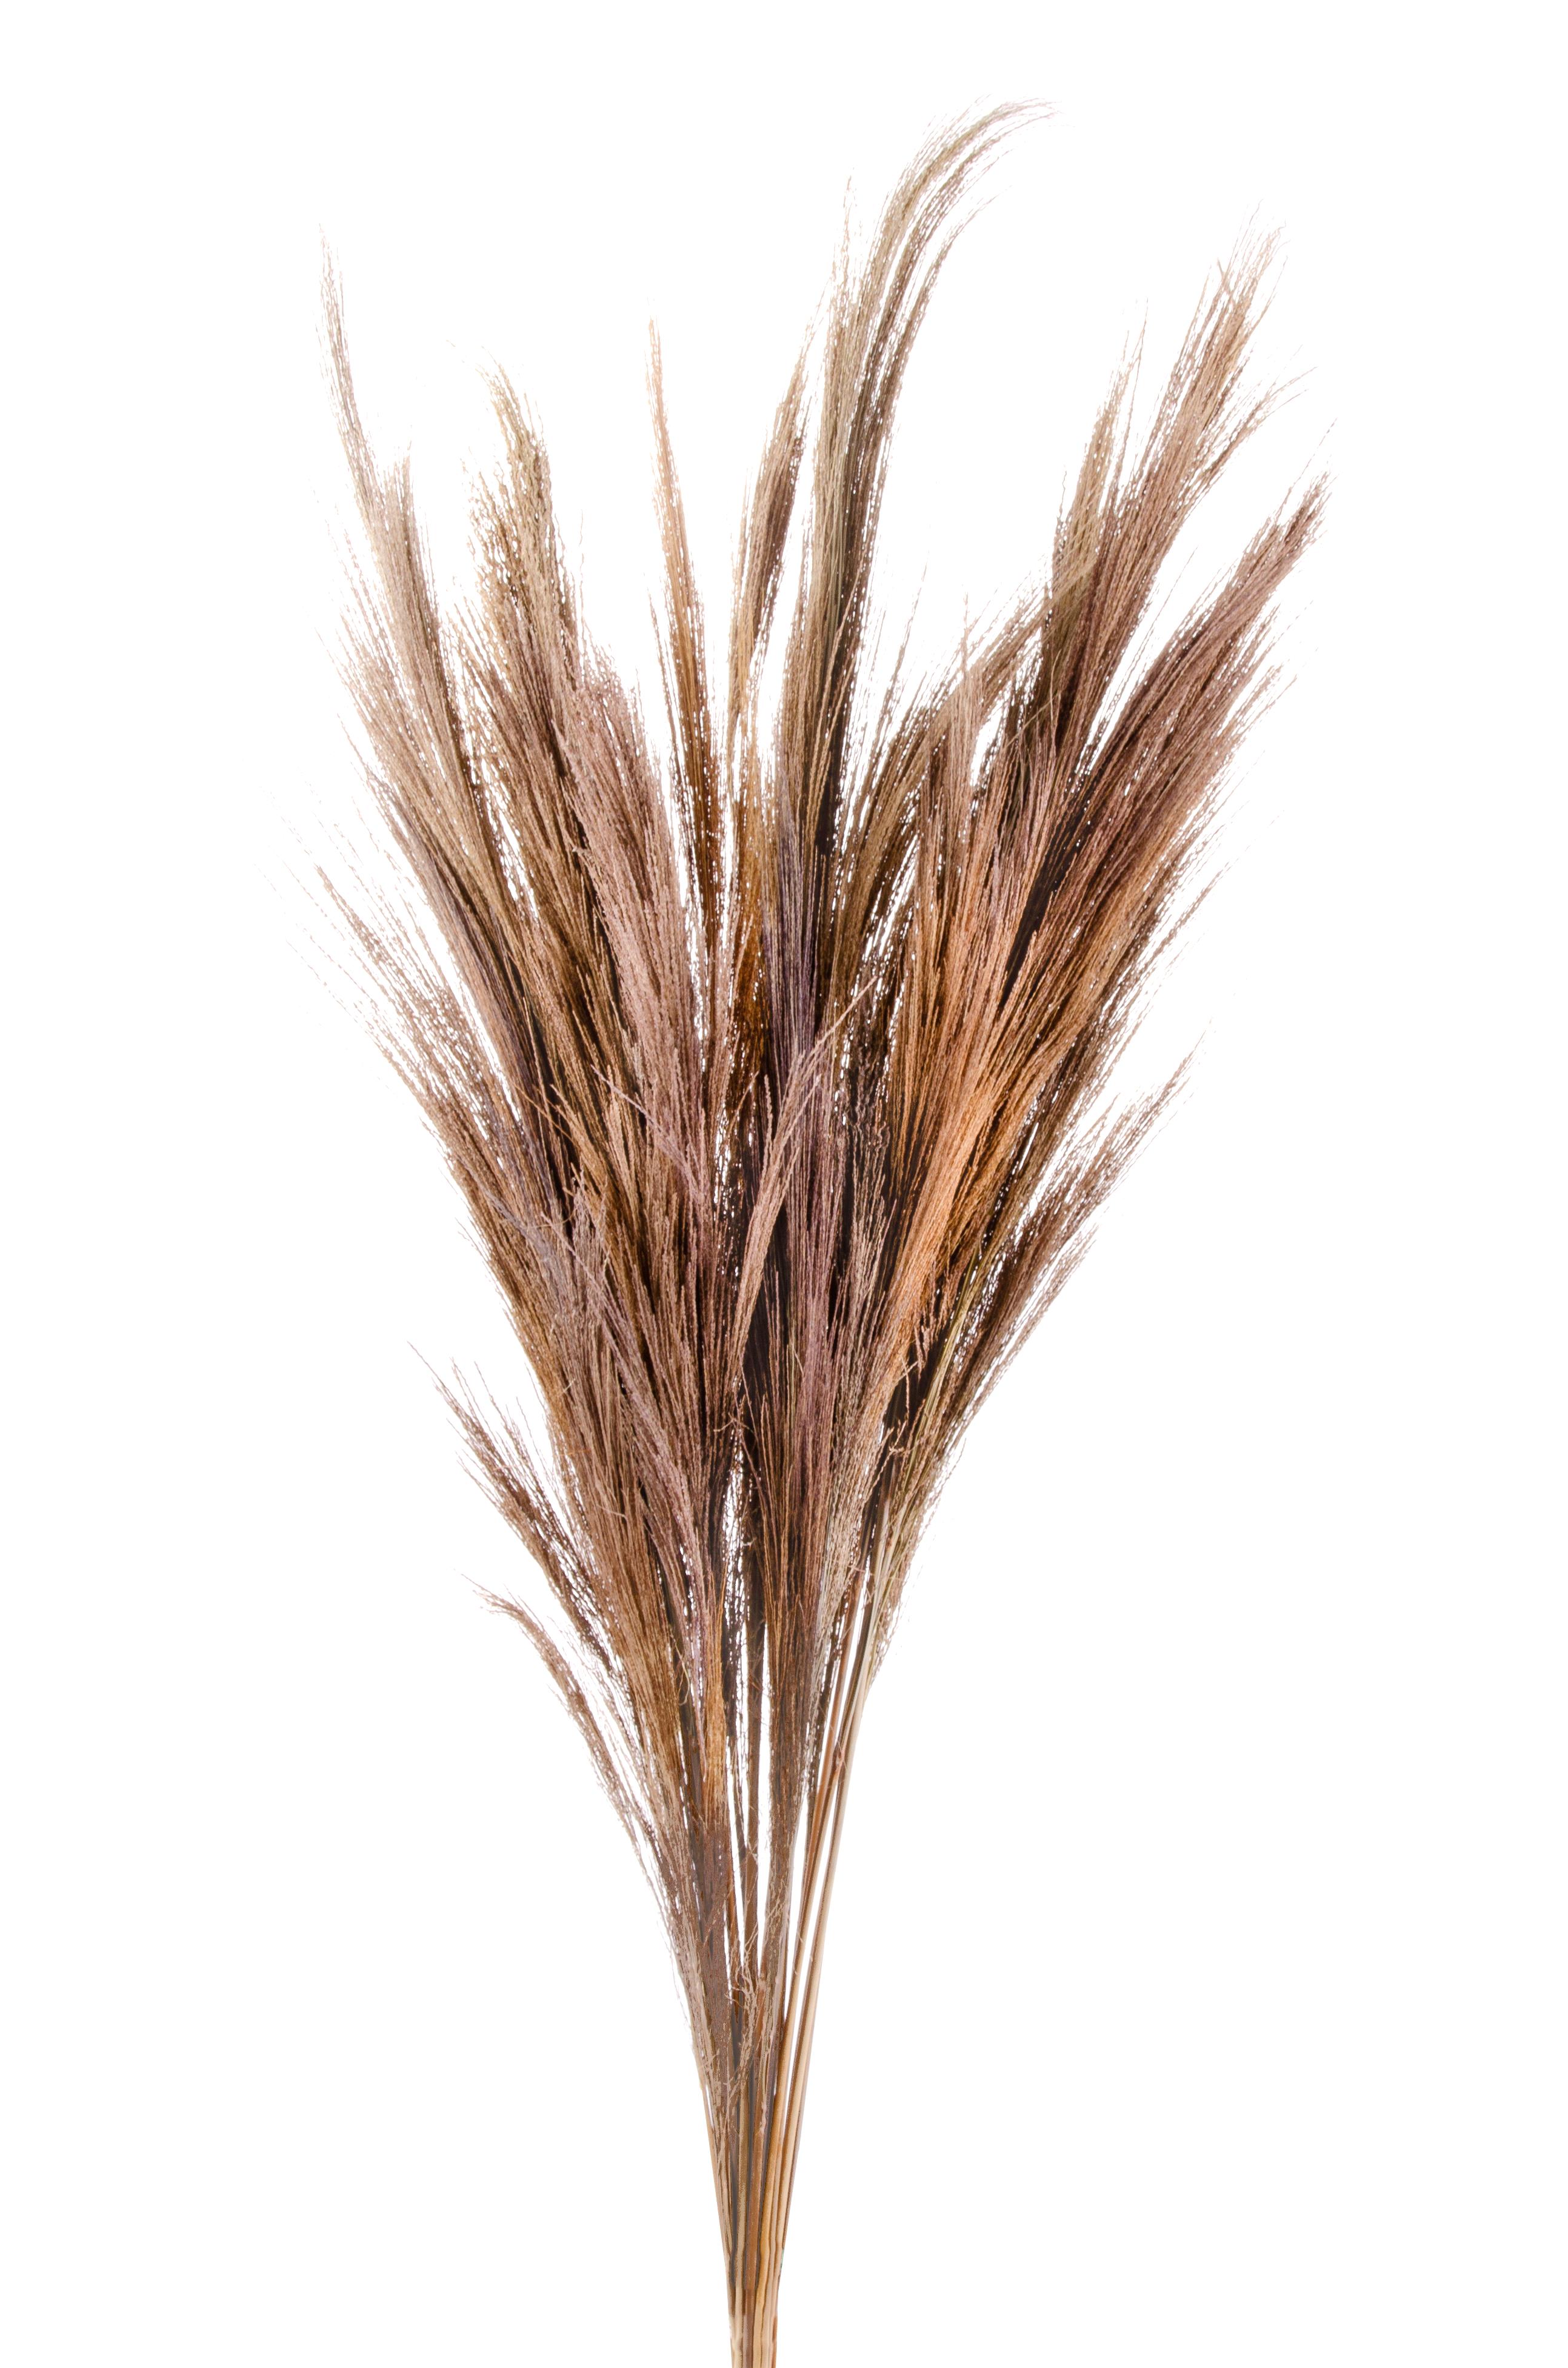 NATURAL PRODUCTS DRIED FLOWERS AND ERBS,GYNERIUM-BROOM 100 CM GRASS NATURALE